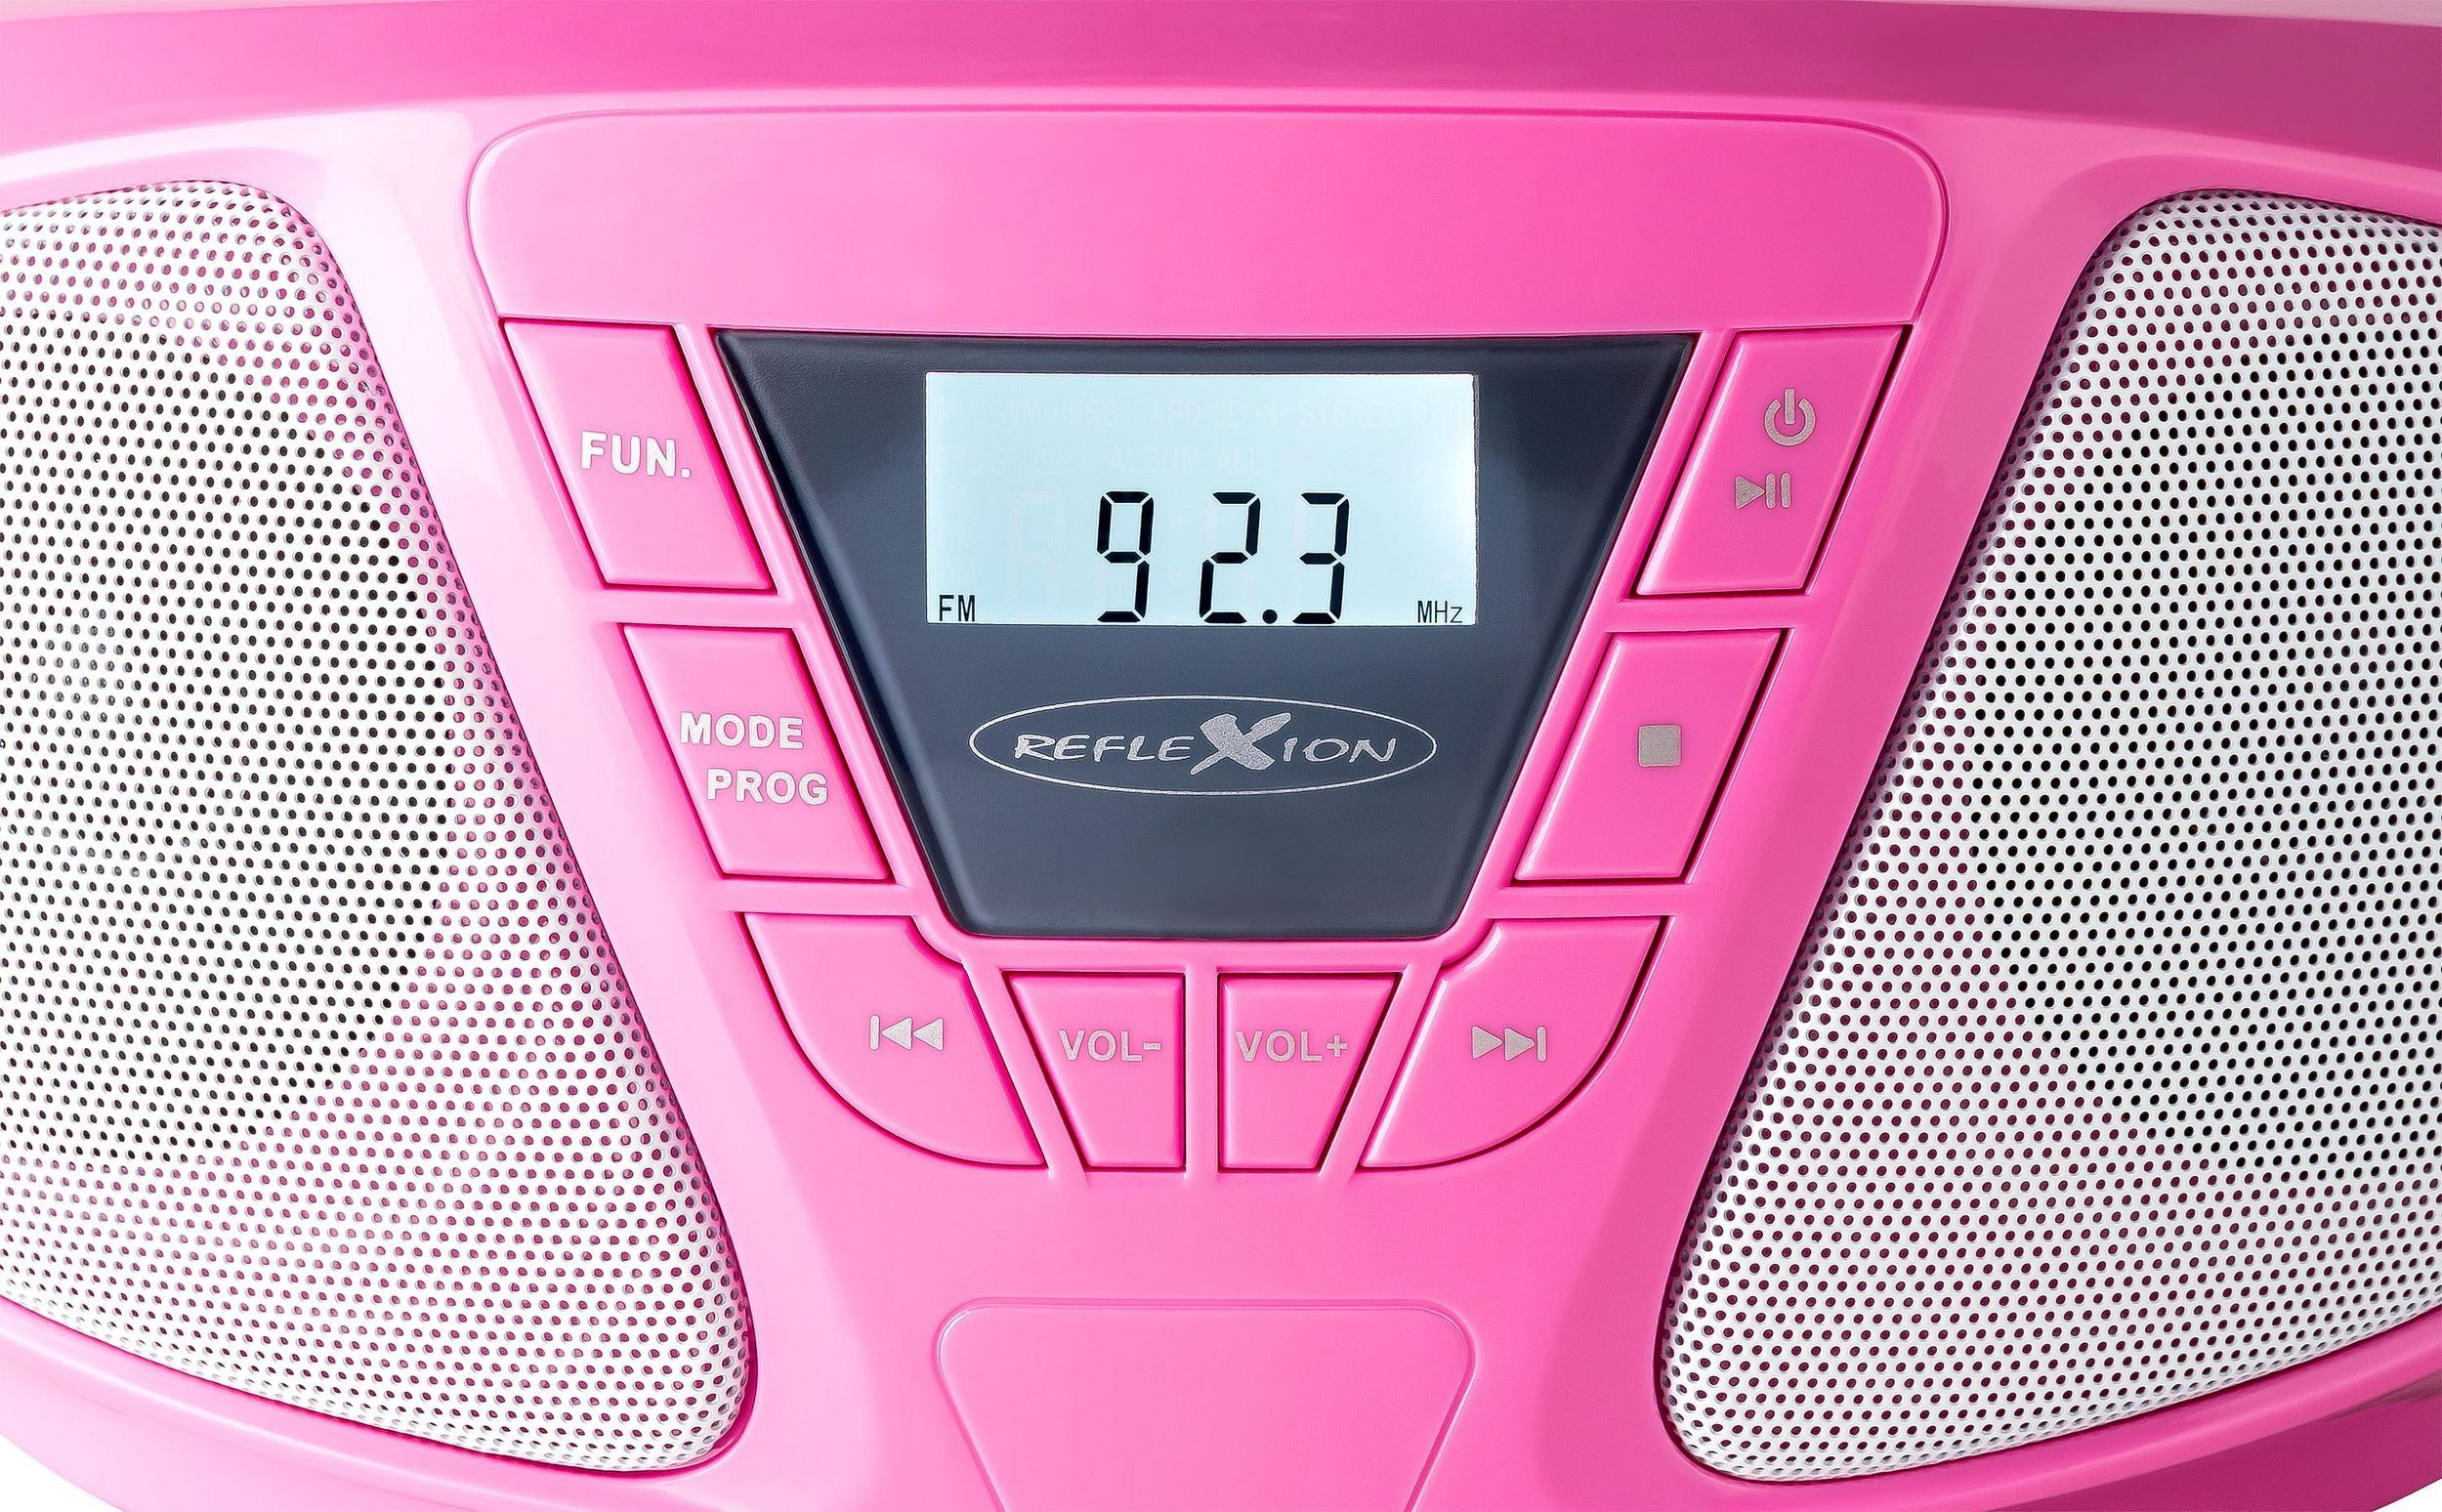 CDR614 W, 16,00 Tracks) 20 Radio, Stereo mit (UKW Radio, Boombox PLL Programmier-Funktion CD-Player (CD: Reflexion pink